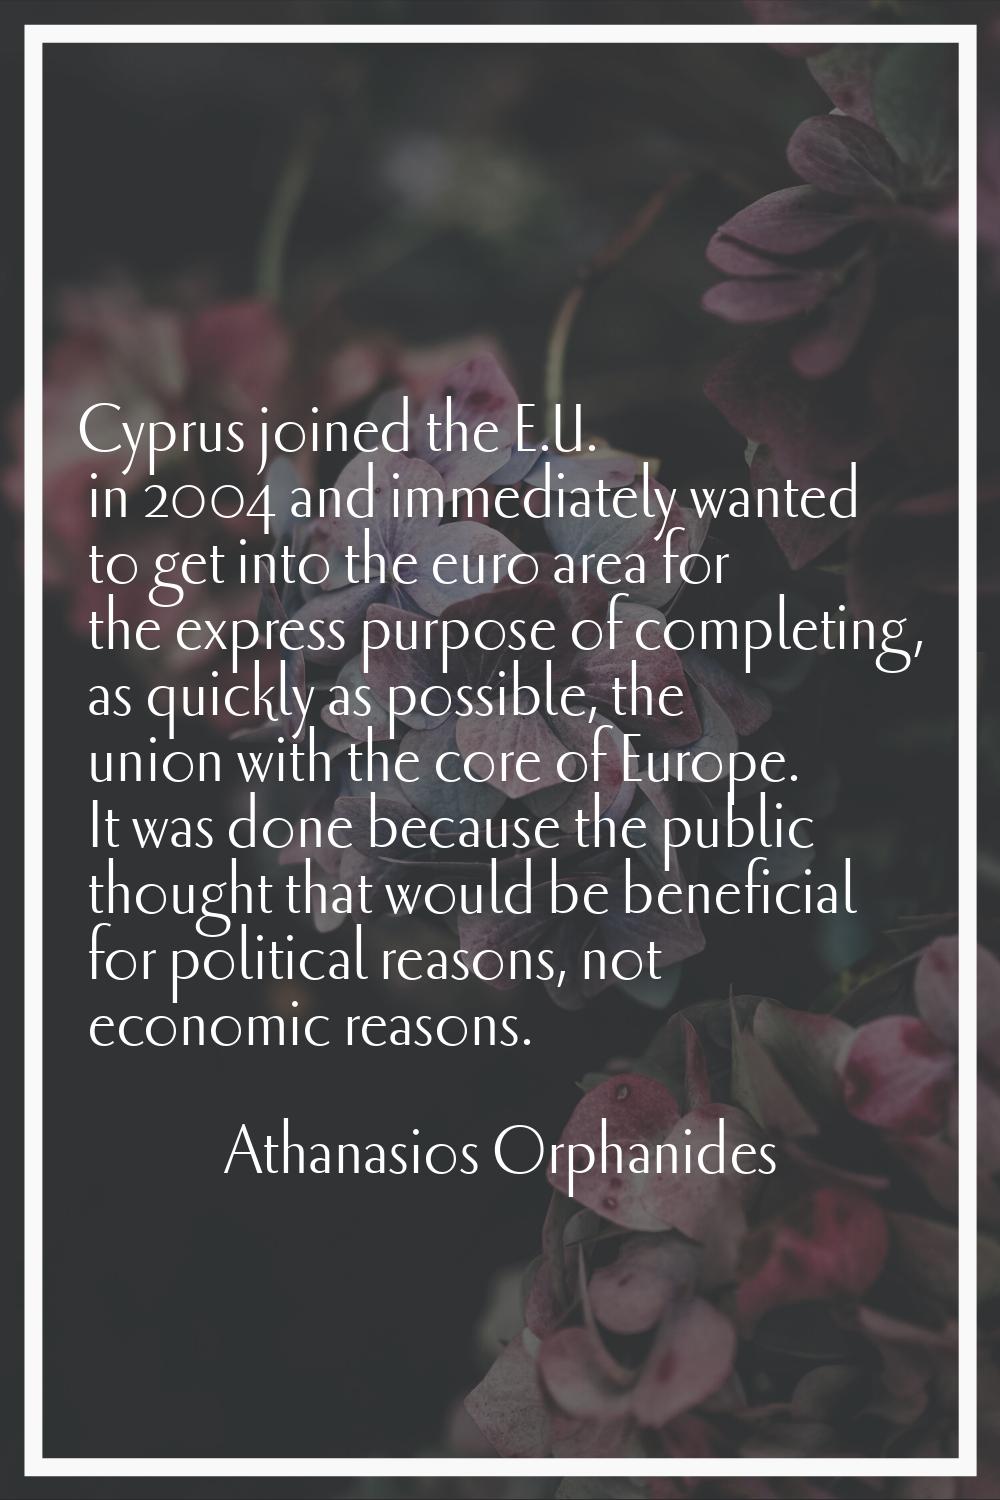 Cyprus joined the E.U. in 2004 and immediately wanted to get into the euro area for the express pur